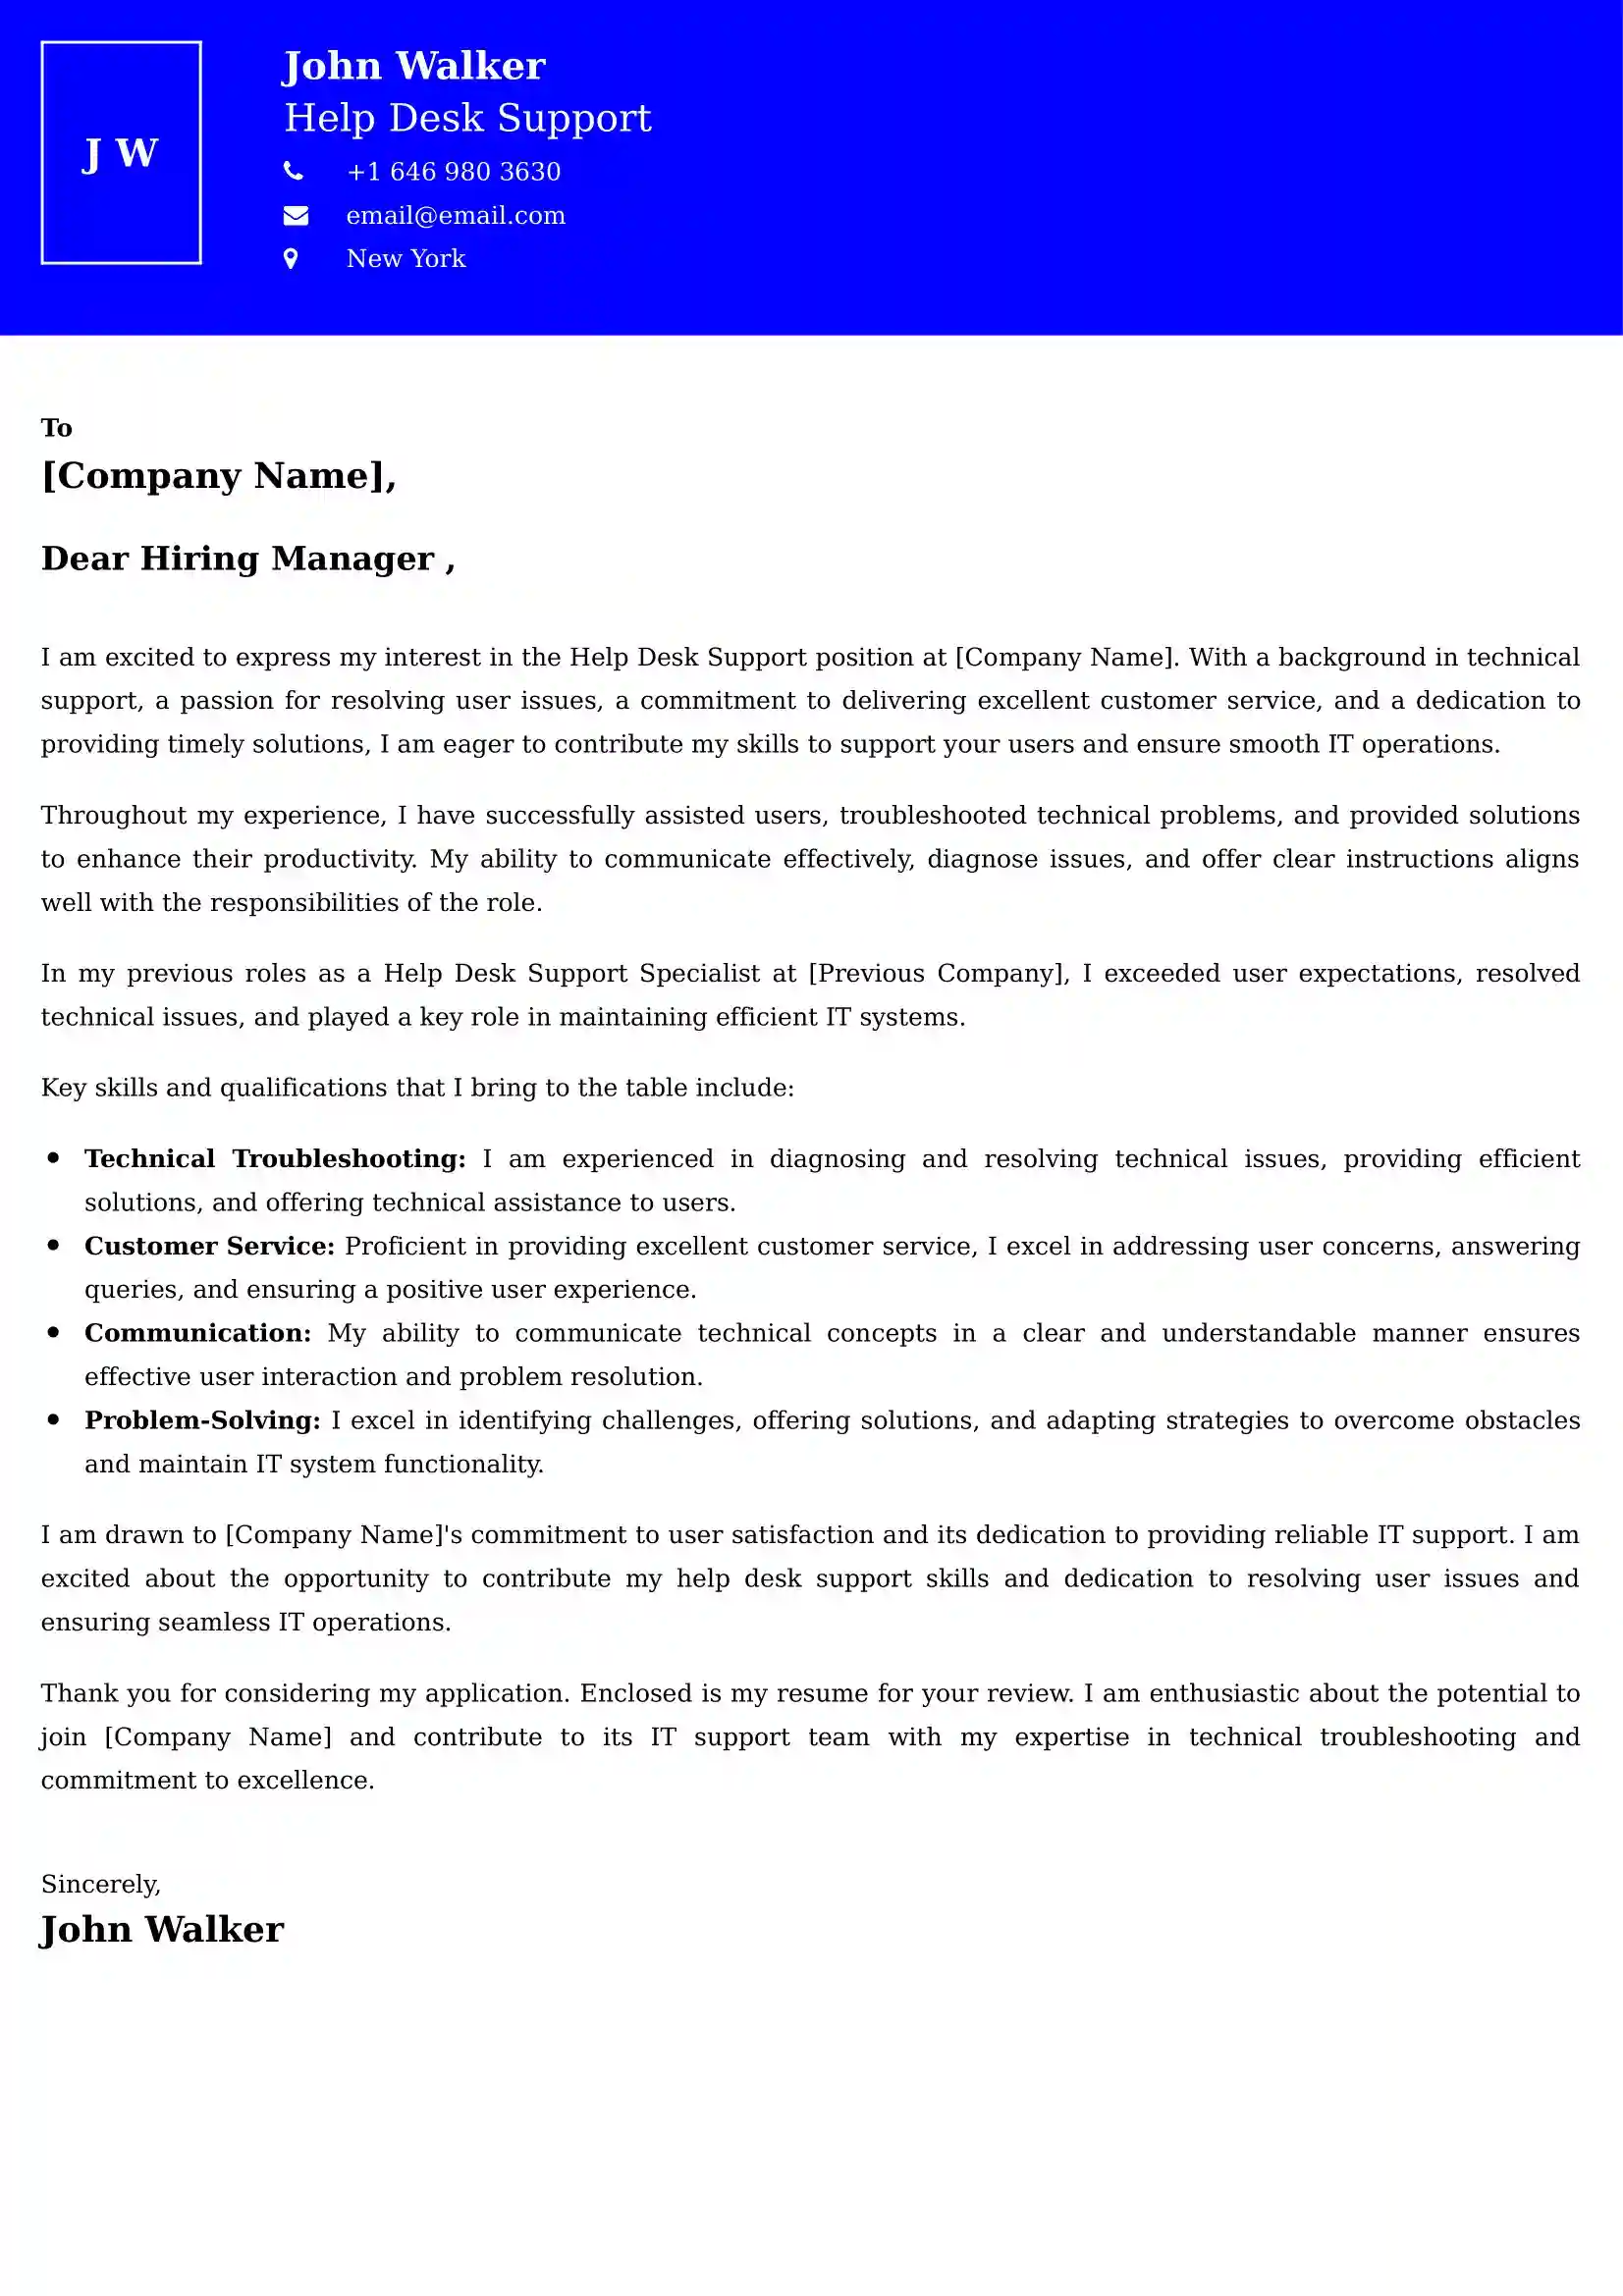 Help Desk Support Cover Letter Examples -Latest Brazilian Templates